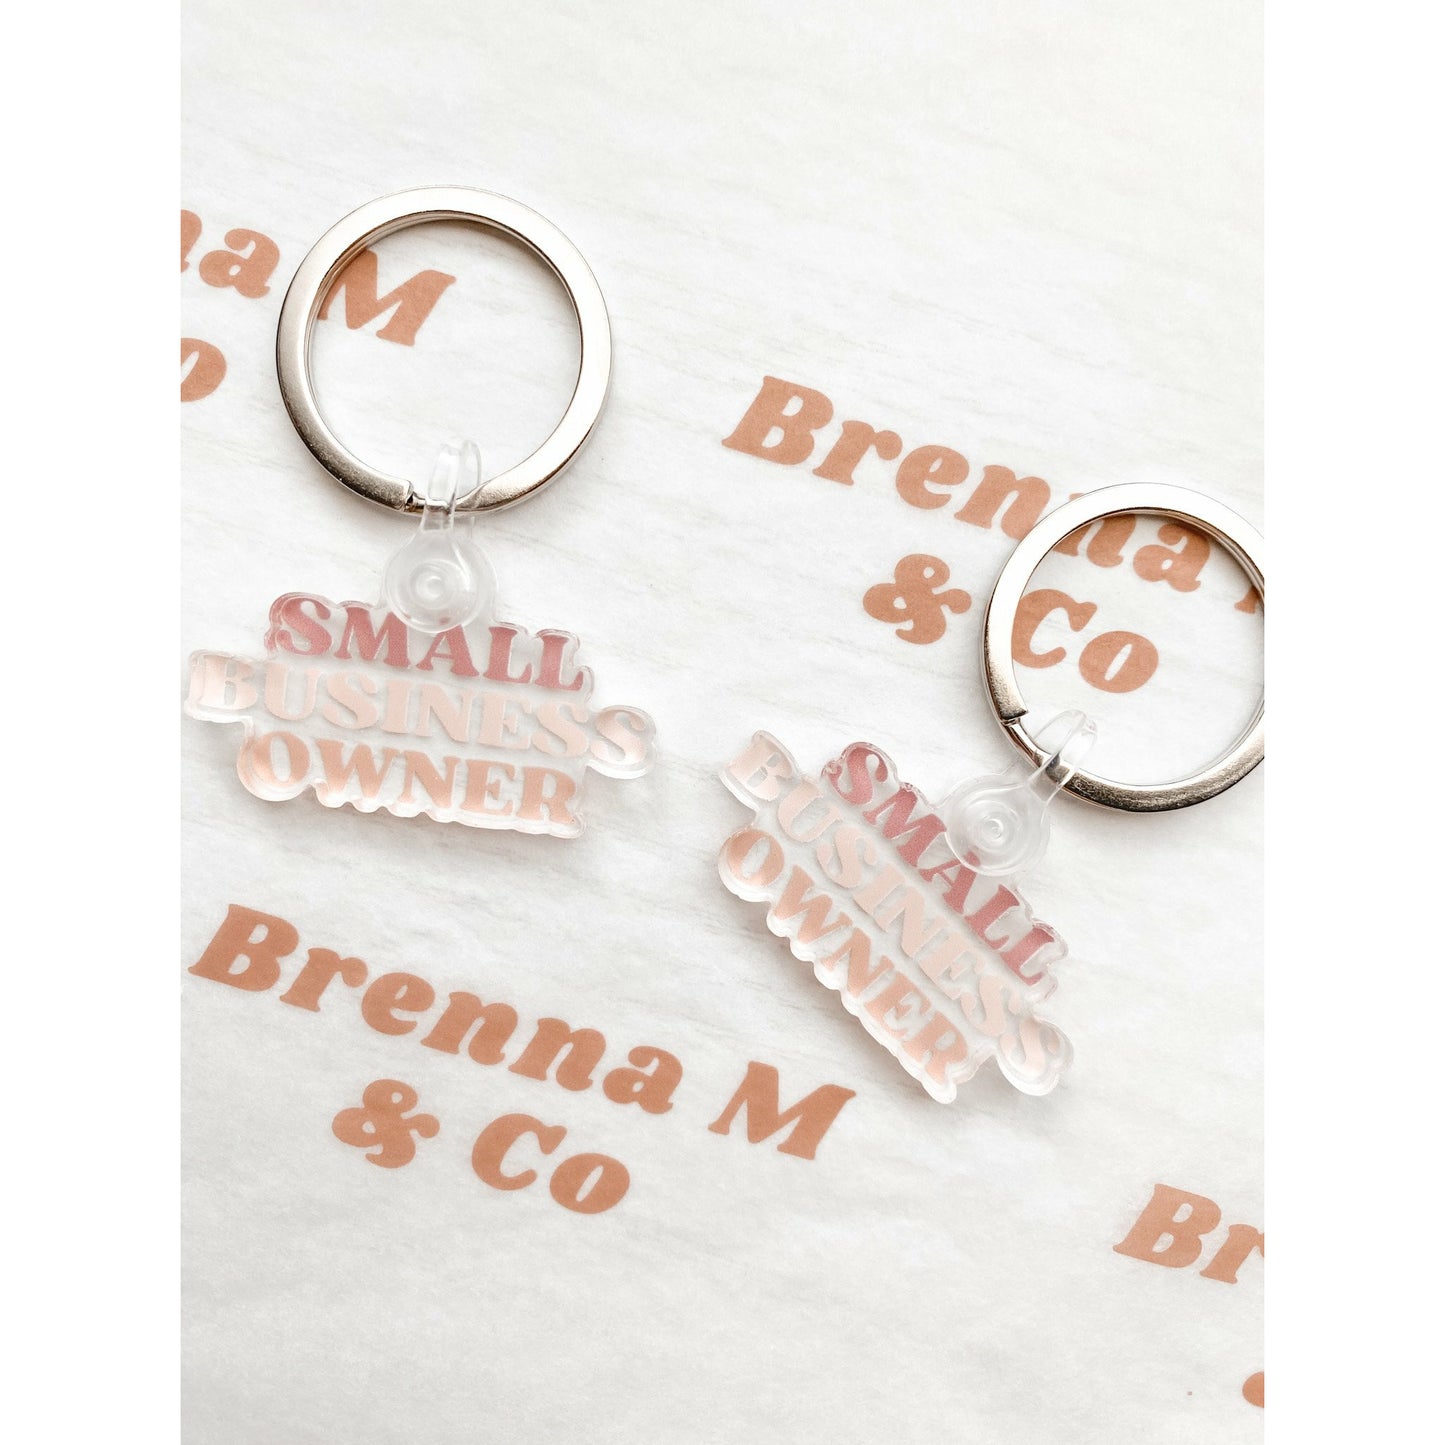 Small Business Owner Keychain